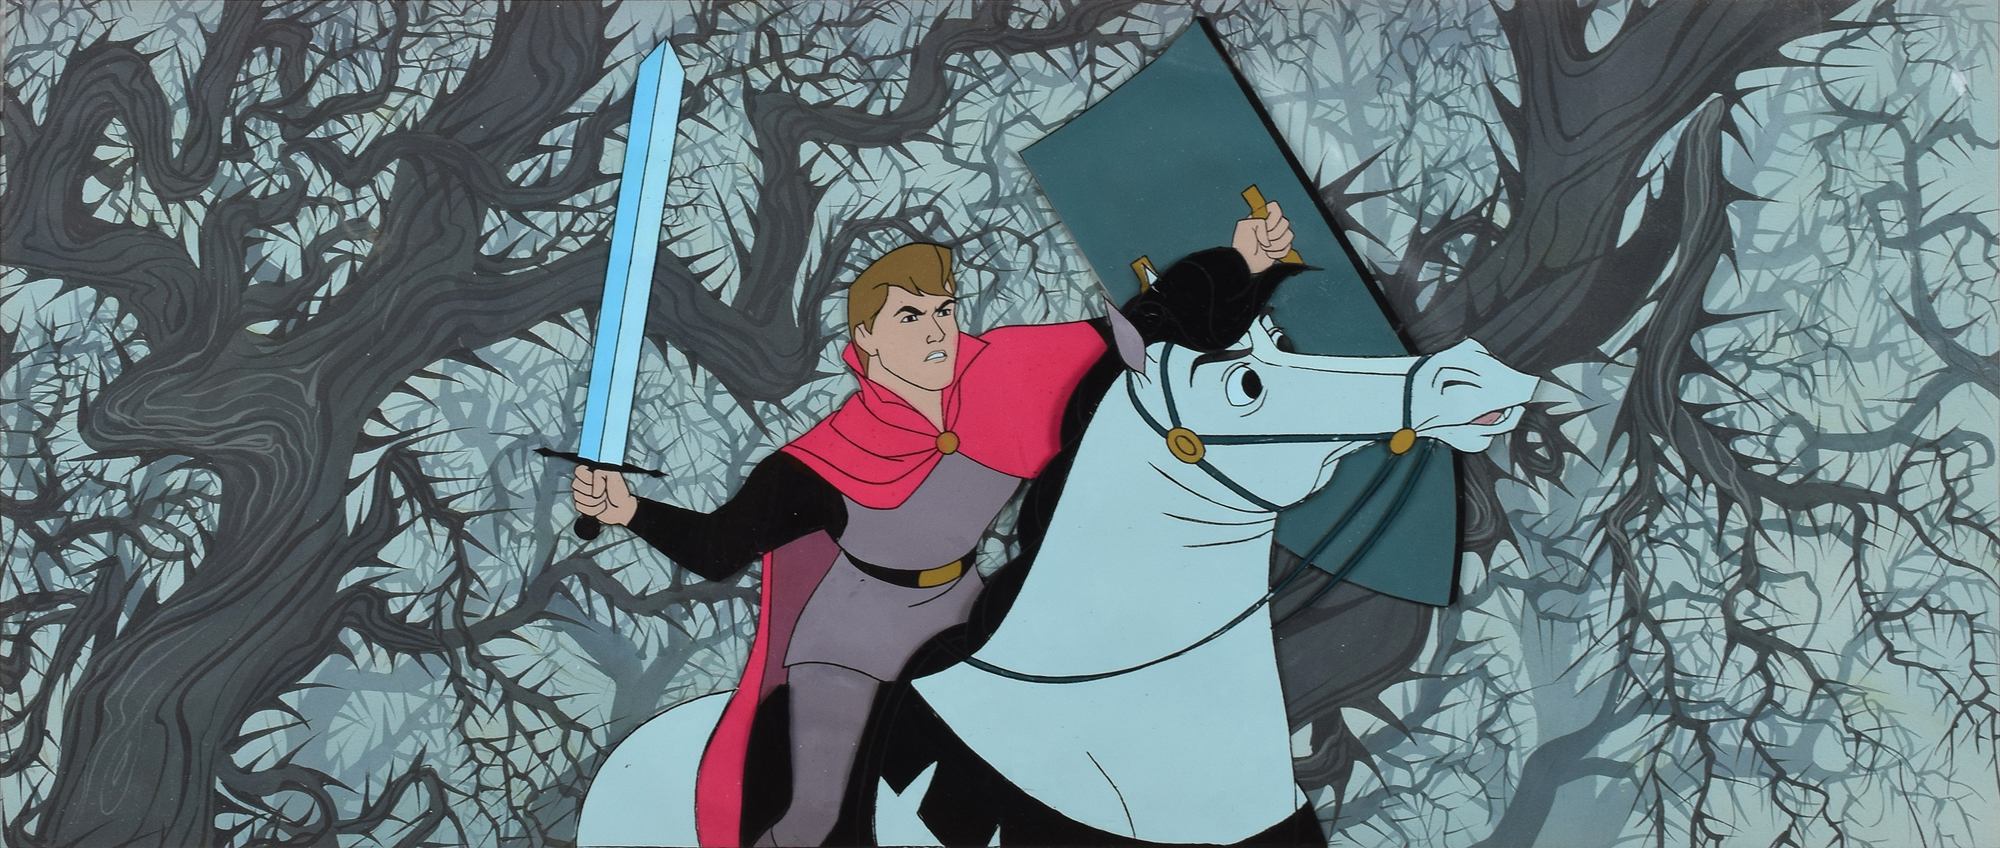 Eyvind Earle Pan Production Background And Prince Phillip And Samson